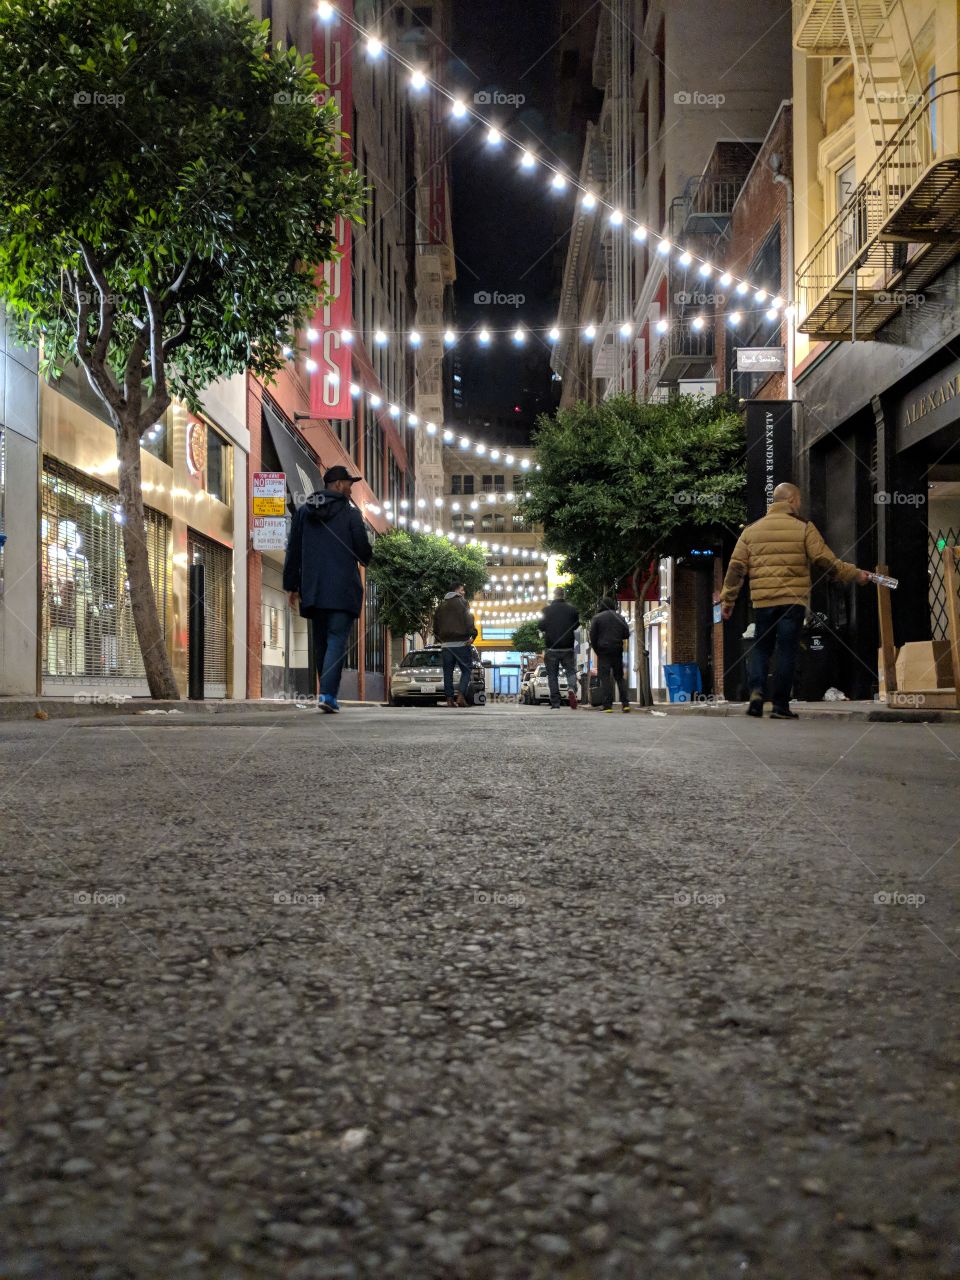 Roaming the city under the lights